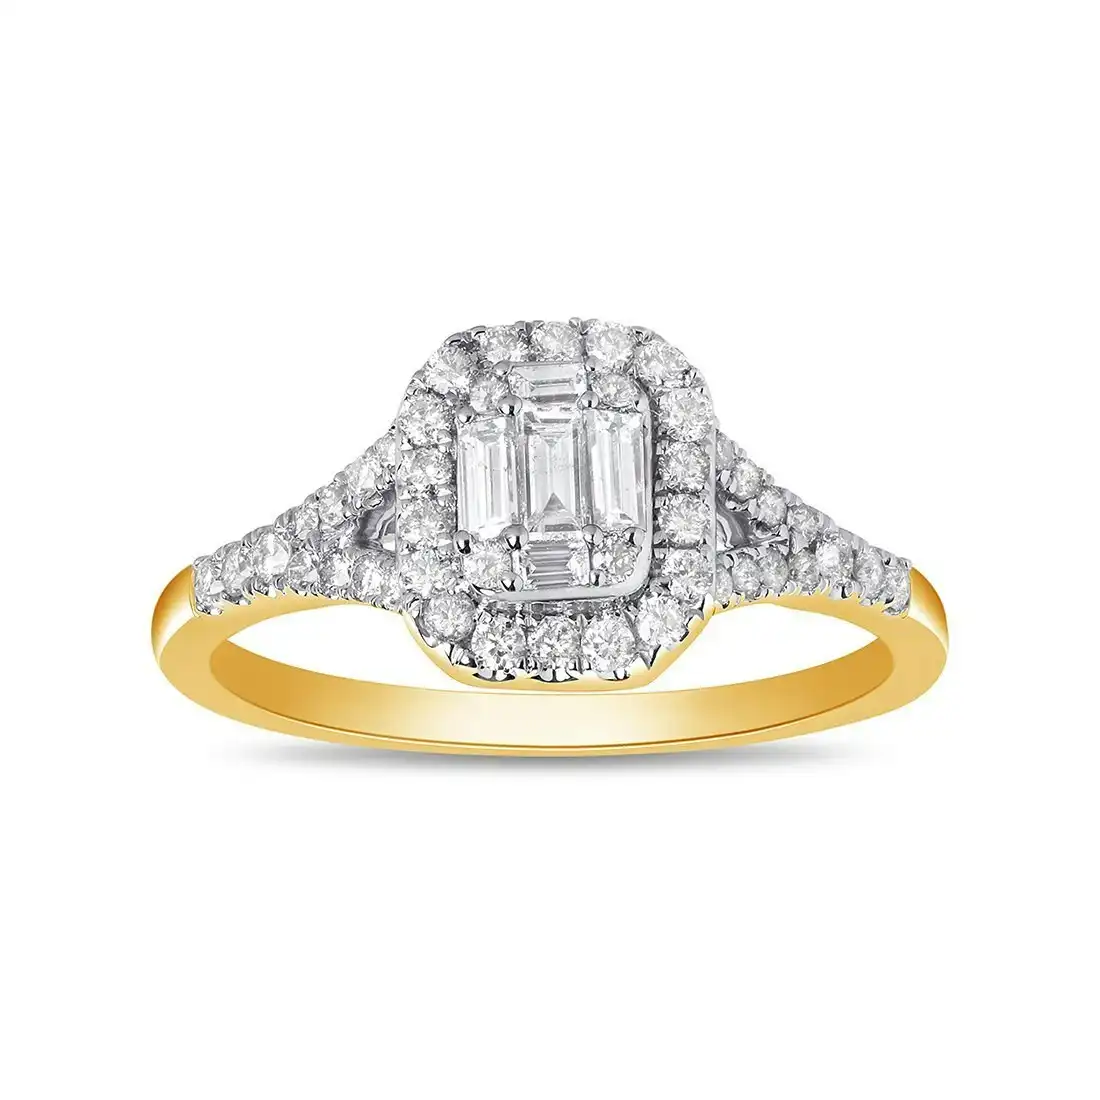 Surround Ring with 1/2ct of Diamonds in 9ct Yellow Gold